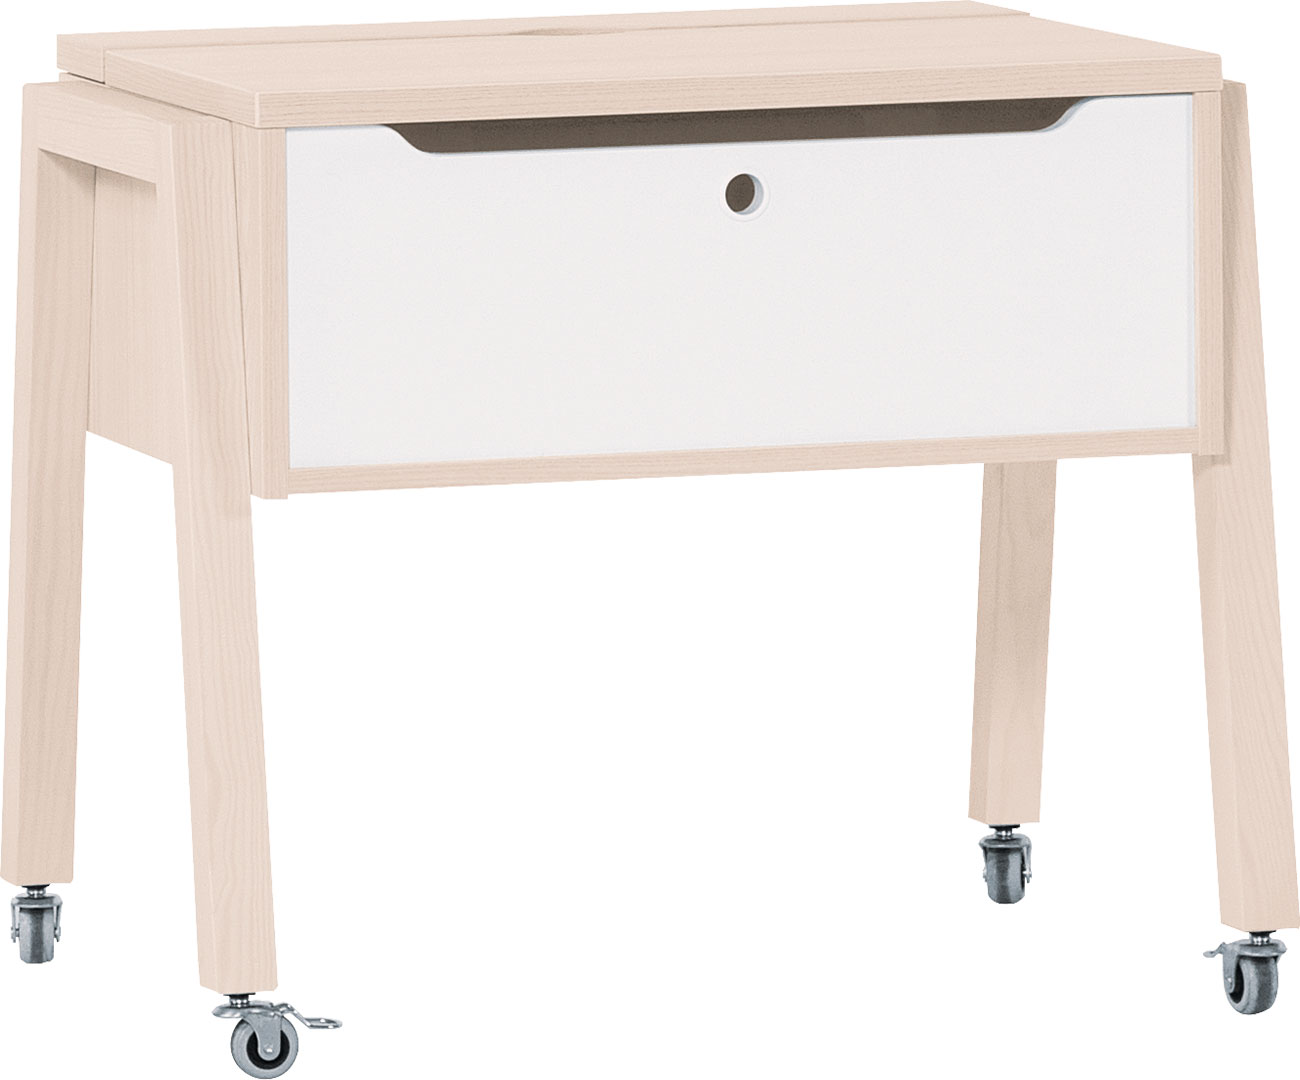 Table with a raised worktop